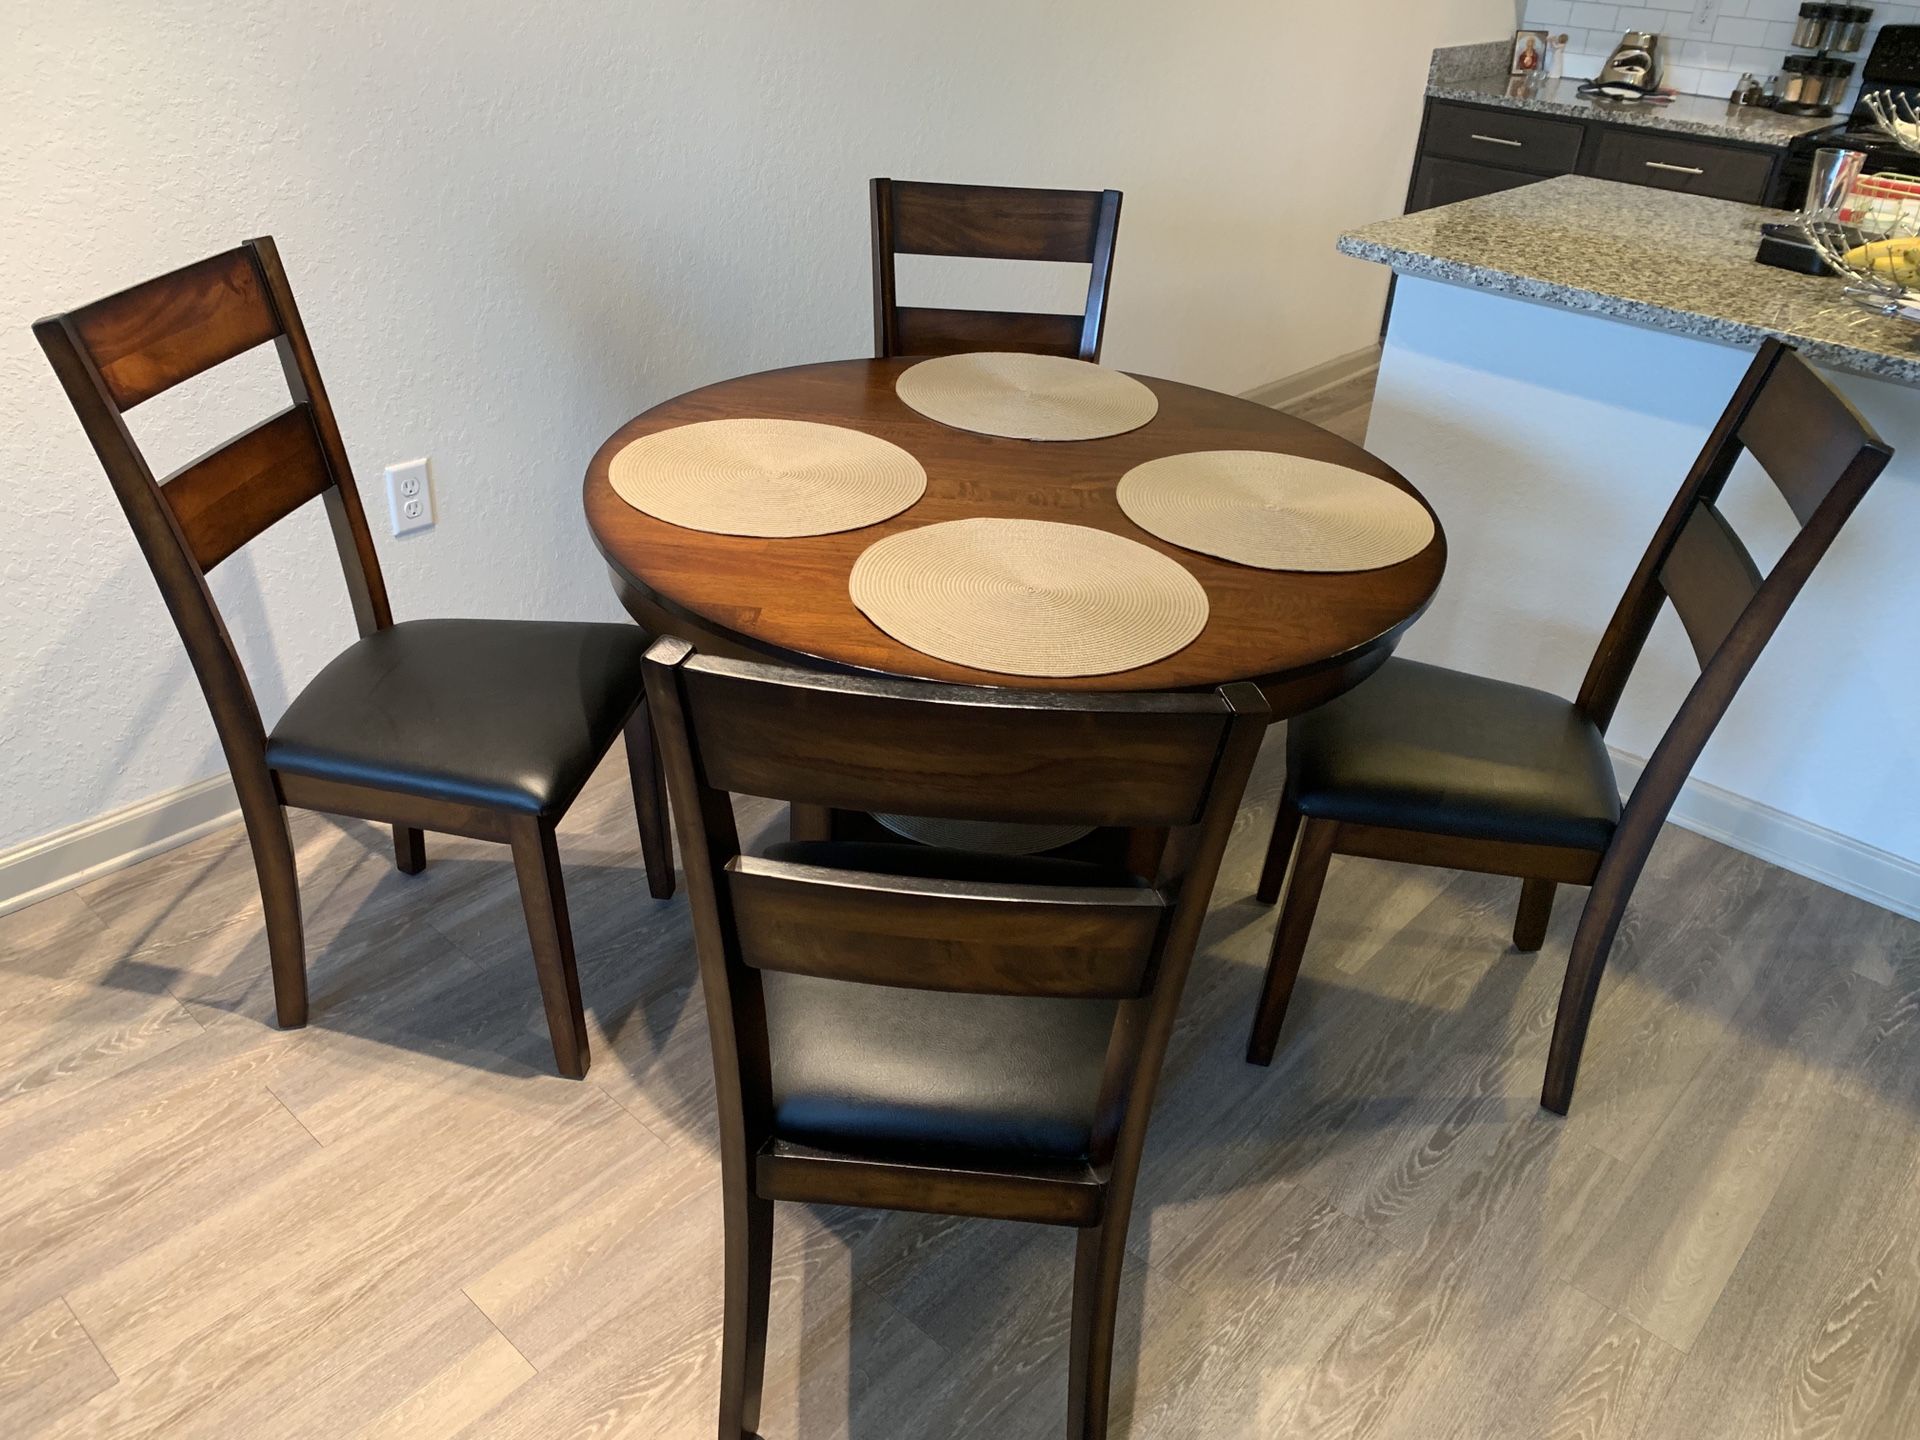 Brand new dining table with 4 comfortable chairs. Excellent Deal. MUST GO!!